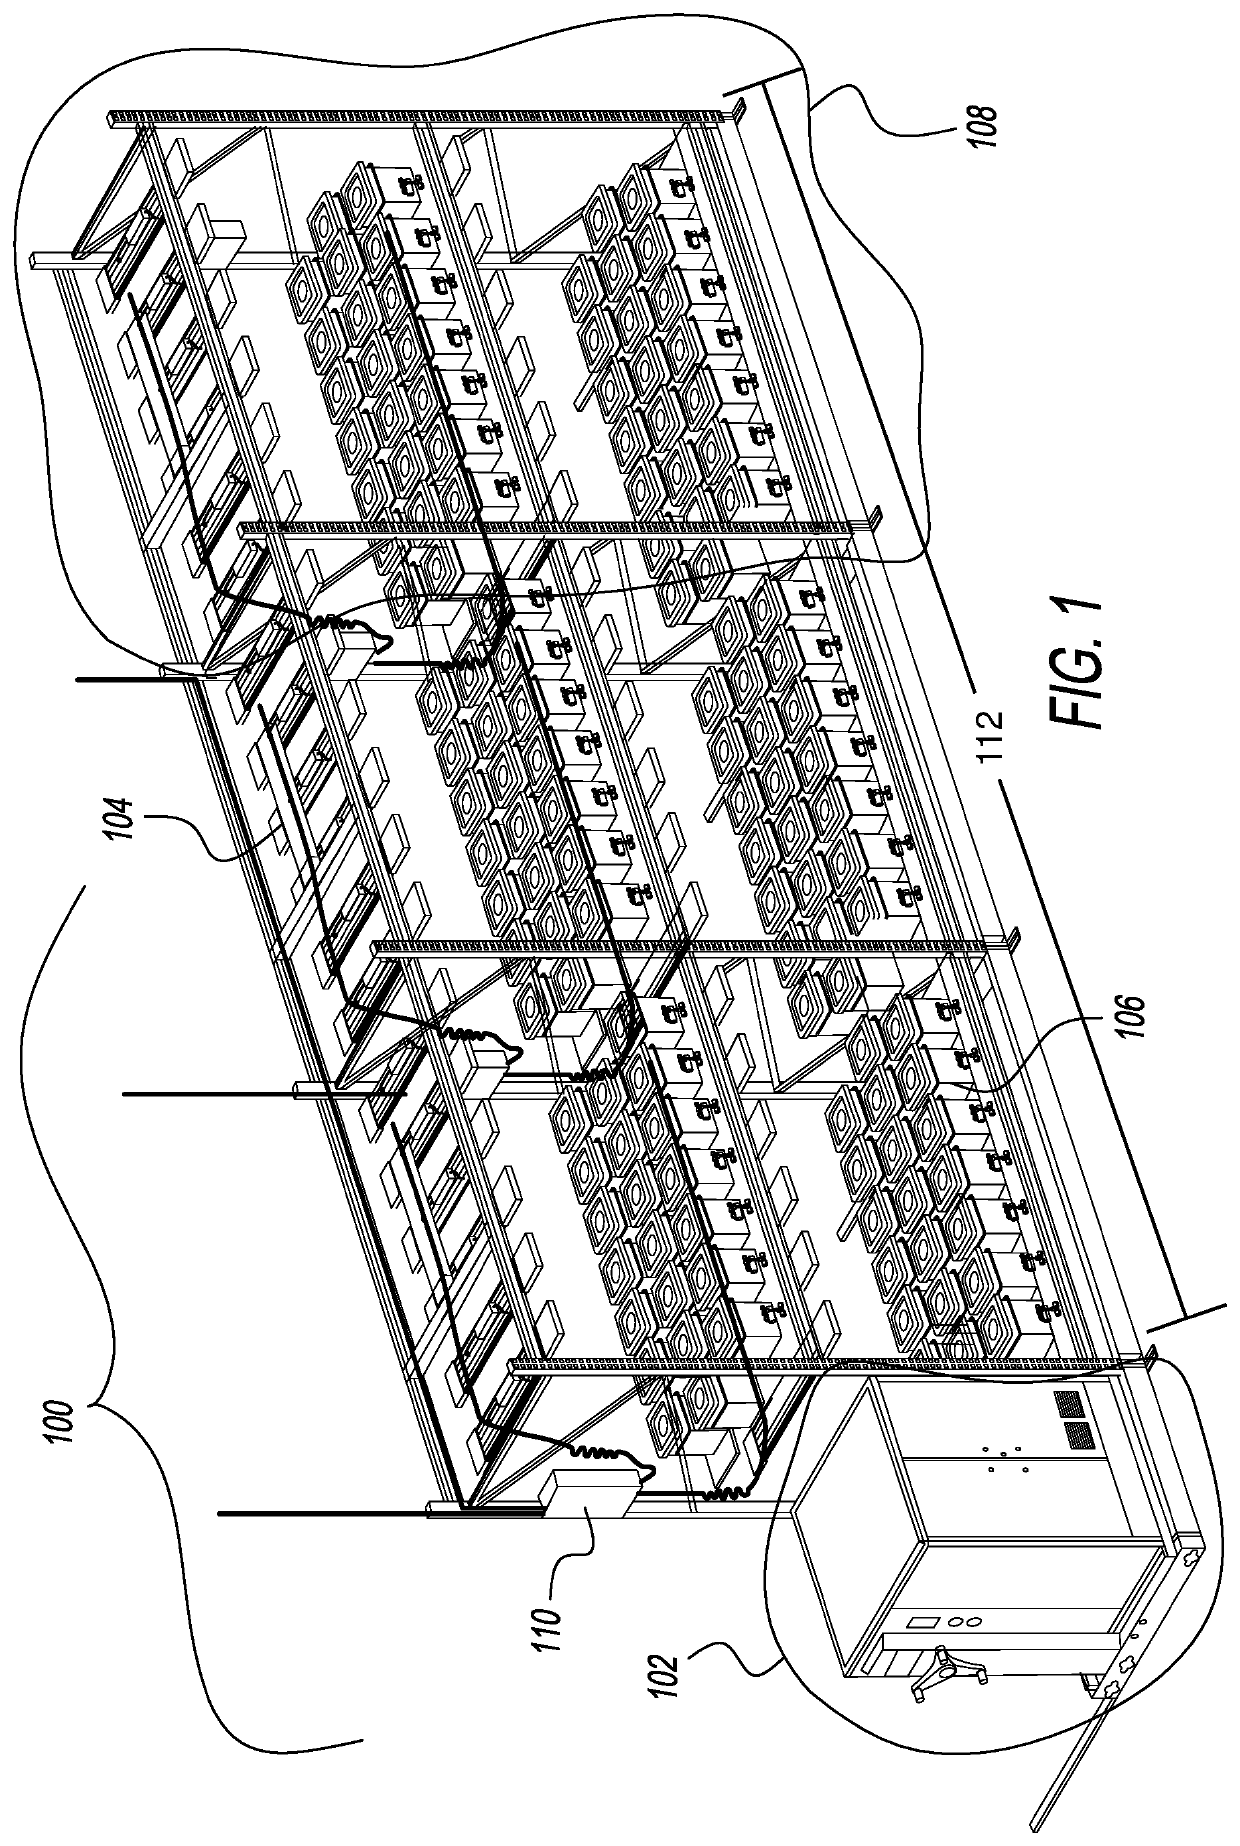 Integrated hydroponic plant cultivation systems and methods